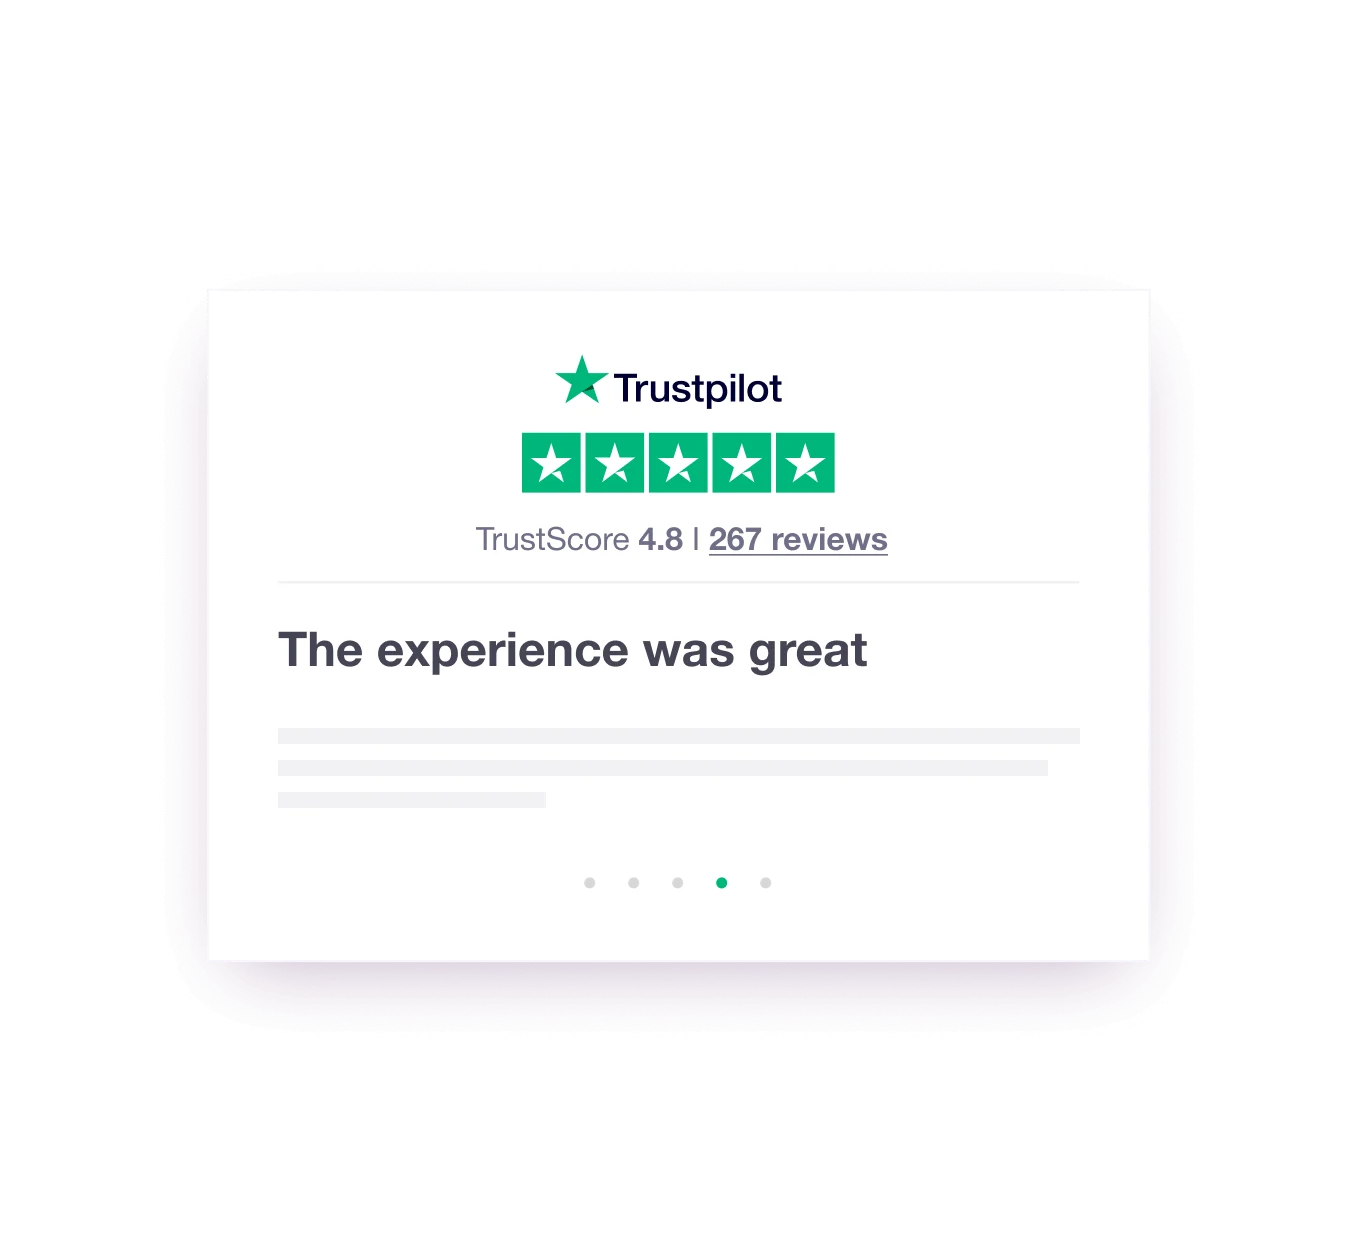 Trustpilot Reviews, the experience was great